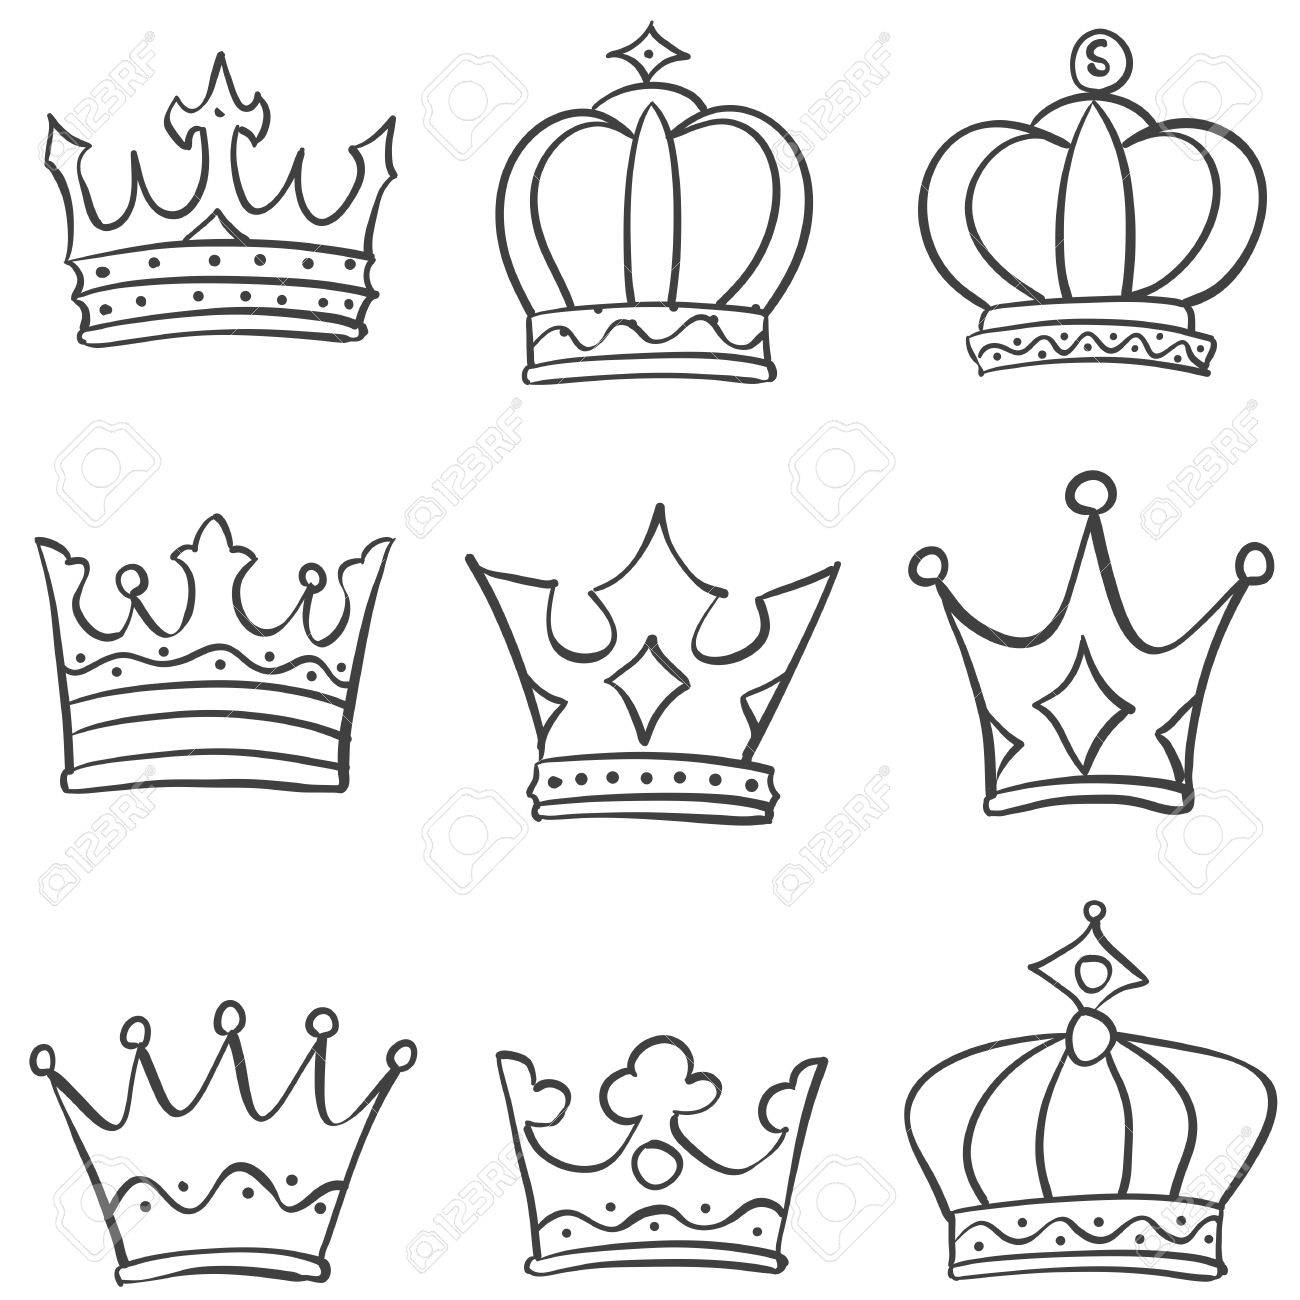 King And Queen Crown Drawing King And Queen Crowns Design Royalty